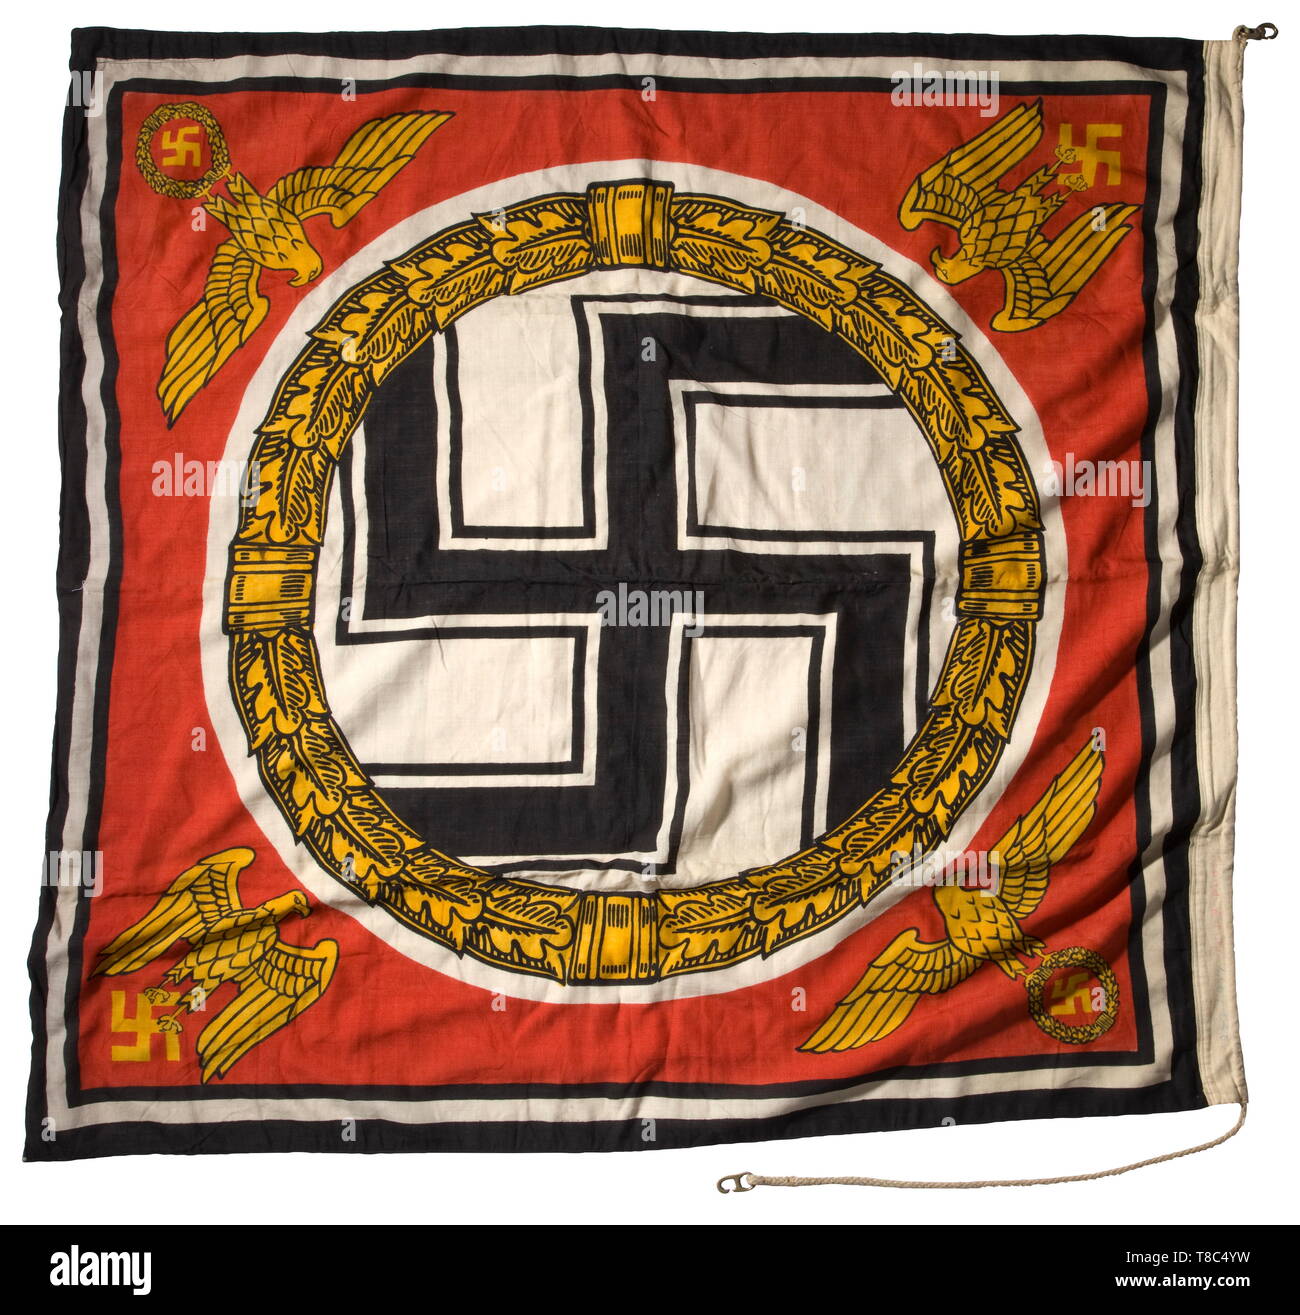 A Führer standard from the heavy cruiser 'Prinz Eugen' Colour-imprinted naval flag cloth, the left side lettered 'Stand. d. Führ. 1,5 x 1,5' with naval acceptance stamp. Colour-fresh, slightly stained, small moth traces. Included is the flag display decree for the 'Prinz Eugen' for the future memorial days of the Battle of Jutland (tr) 'In honour of those who were killed in action in the World War under the imperial and royal Austrian war flag, on 31 May this flag is set on the main topmast instead of the imperial war flag aboard the heavy cruiser 'Prinz EugenÂ´. Führer H 2, Editorial-Use-Only Stock Photo